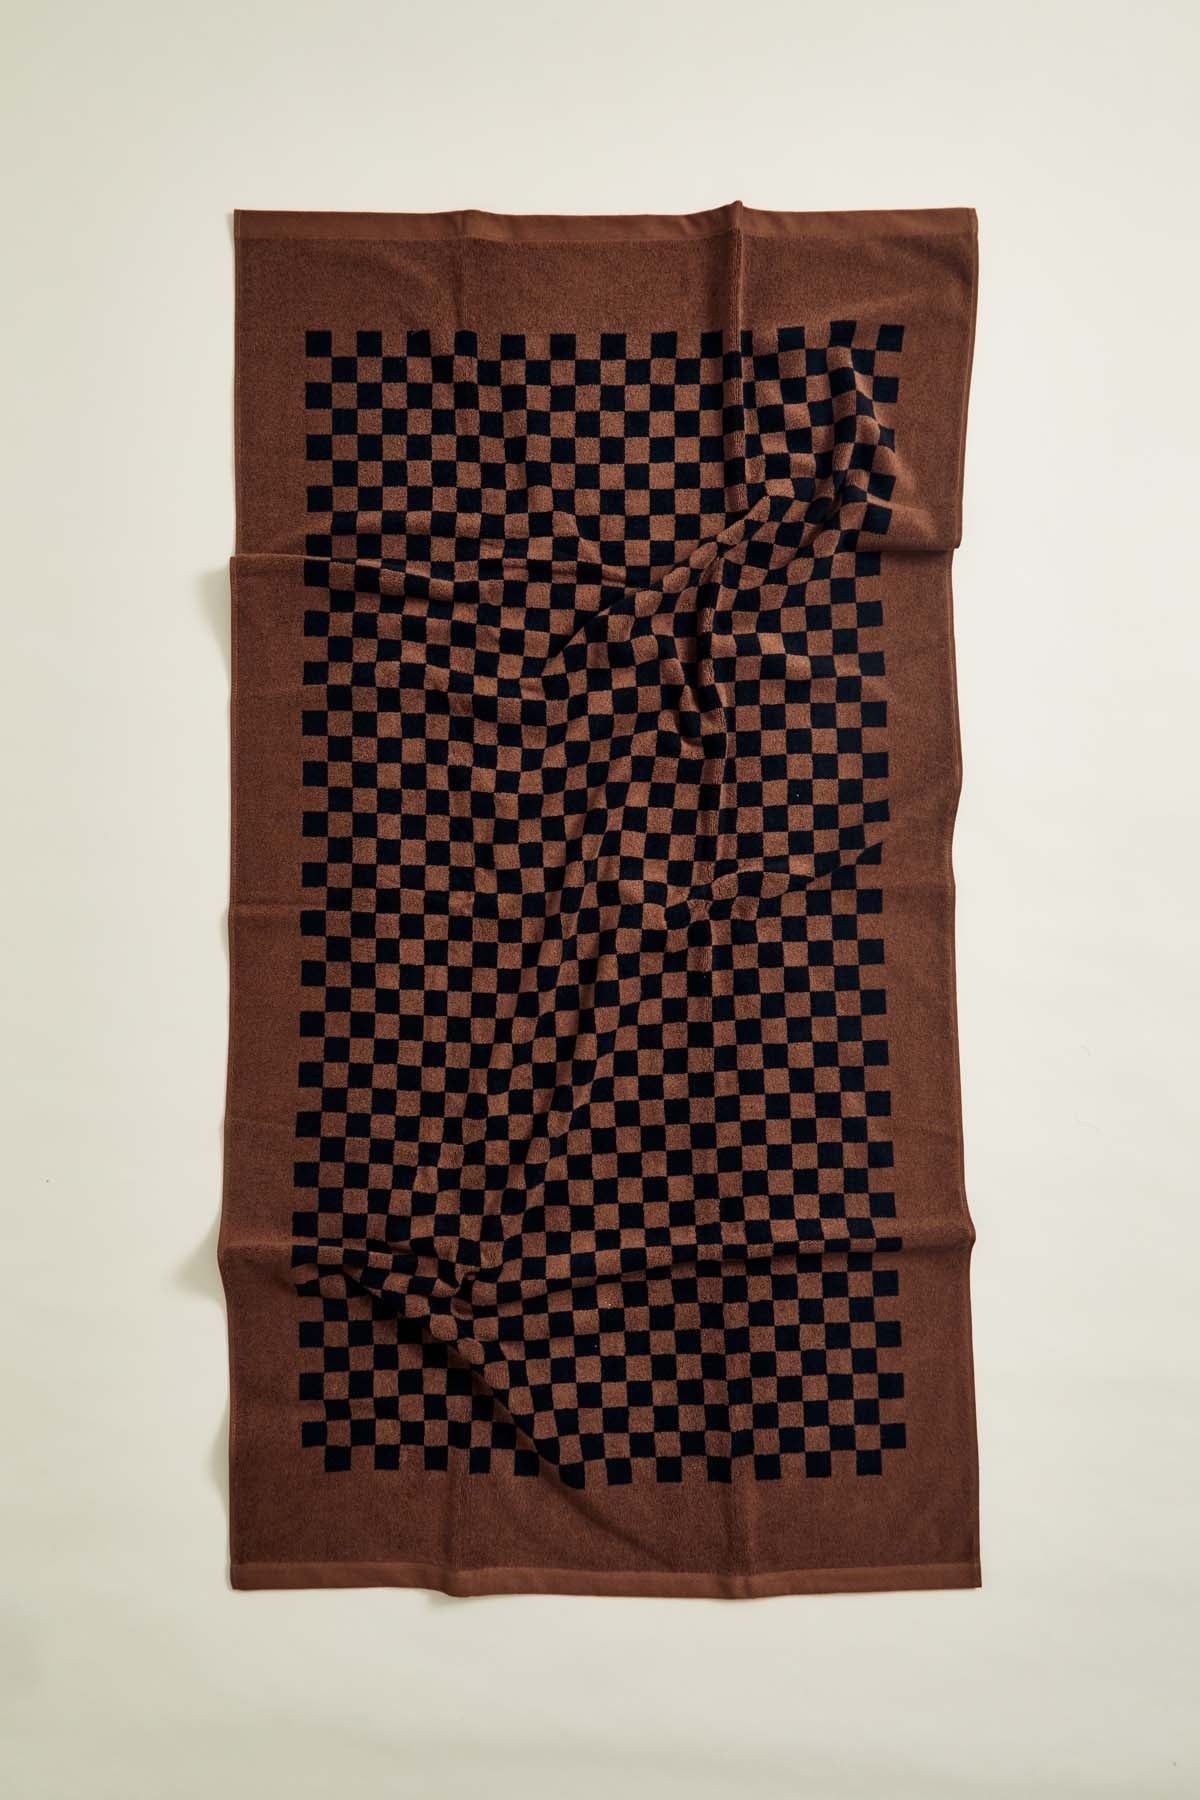 Roman Organic Cotton Pool Towel in Tabac and Noir